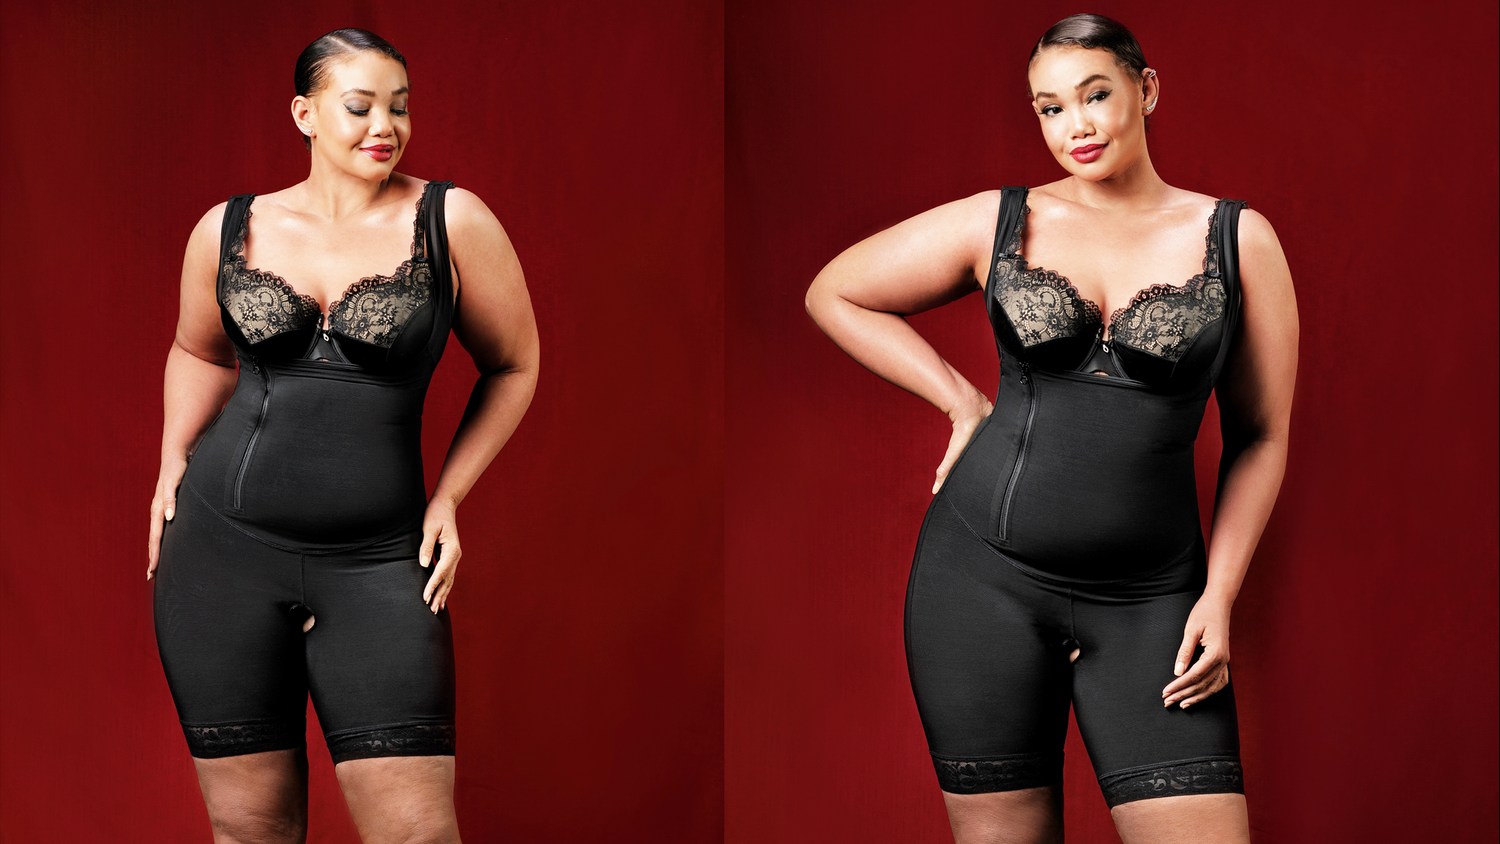 Diva's Curves - Looking for a Quality Plus Size Shapewear